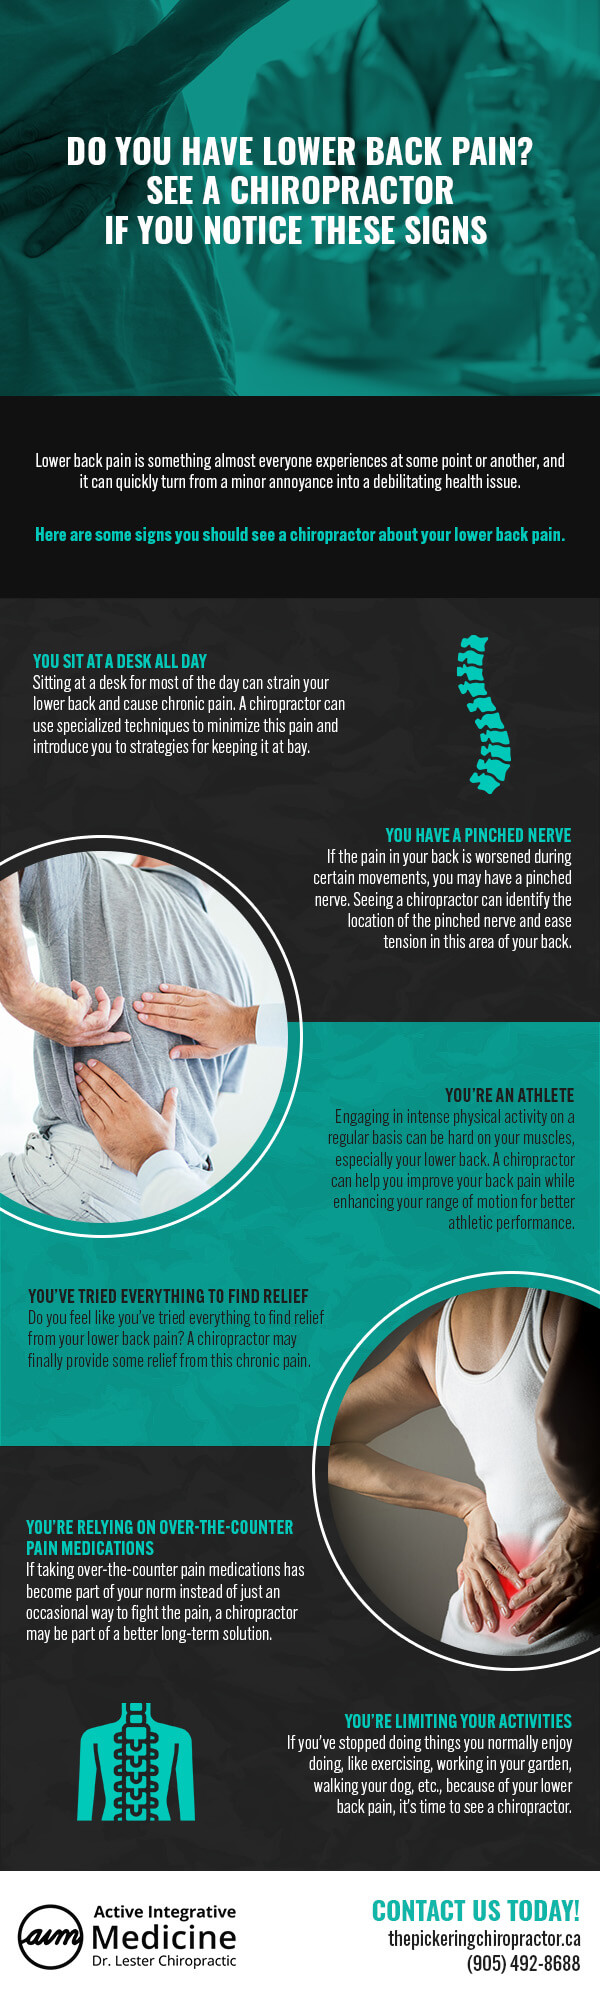 Chiropractic care can help with lower back pain.